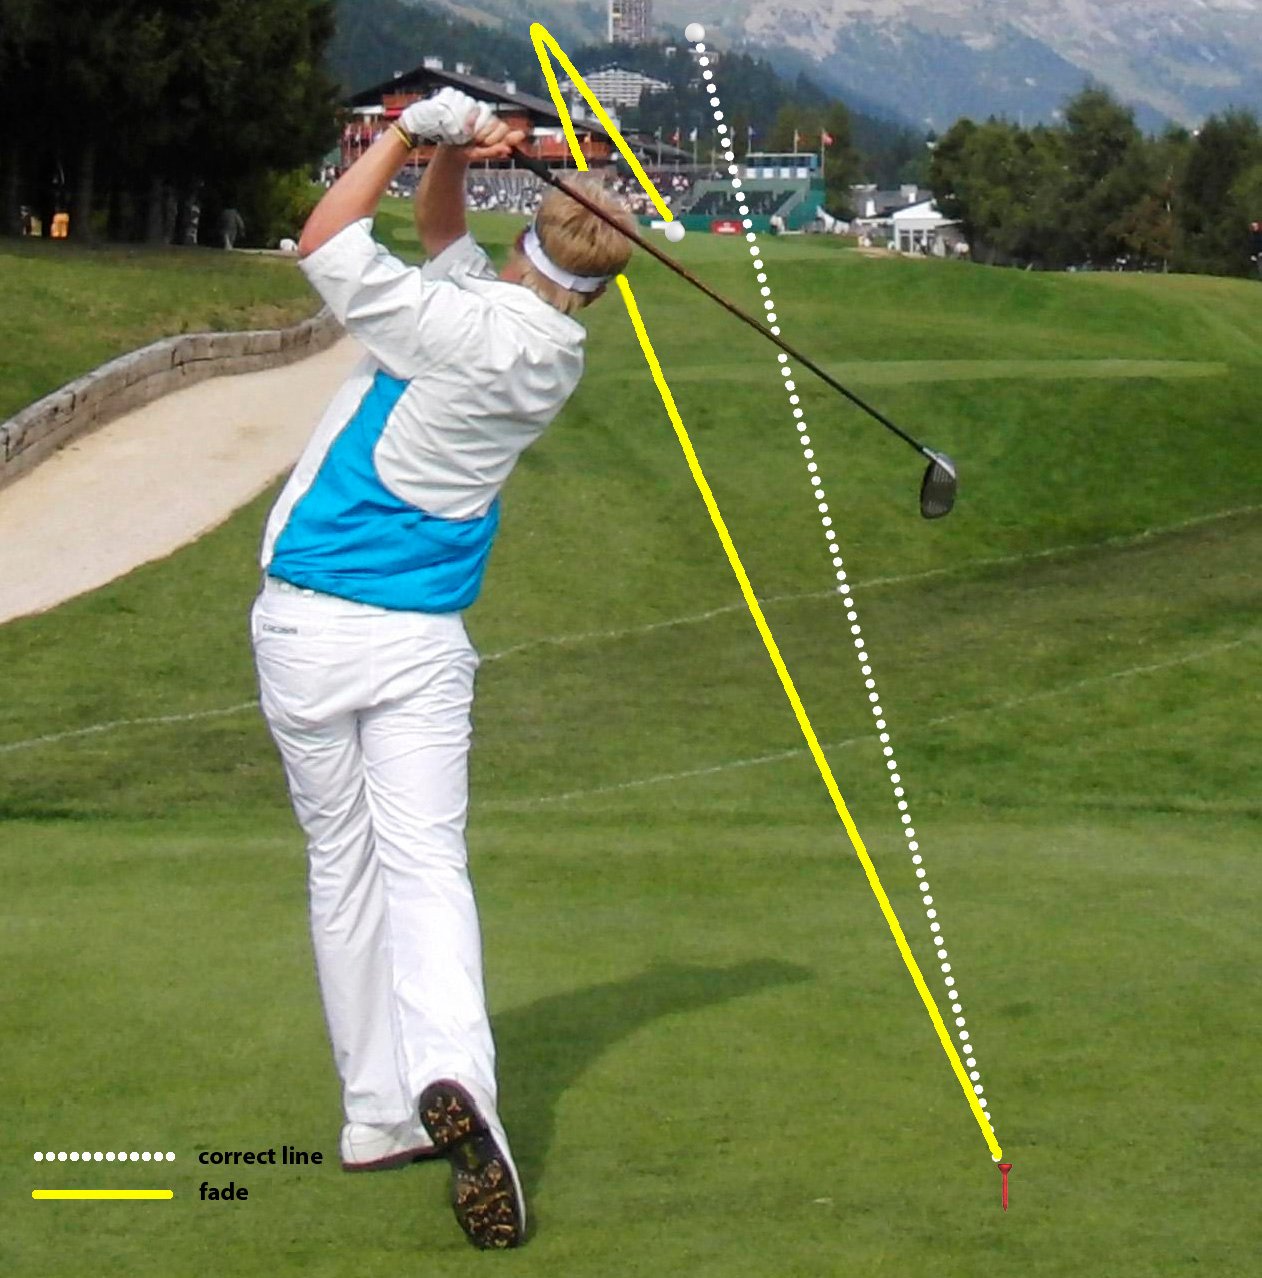 Mastering the Fade: A Step-by-Step Guide on How to Hit a fade golf